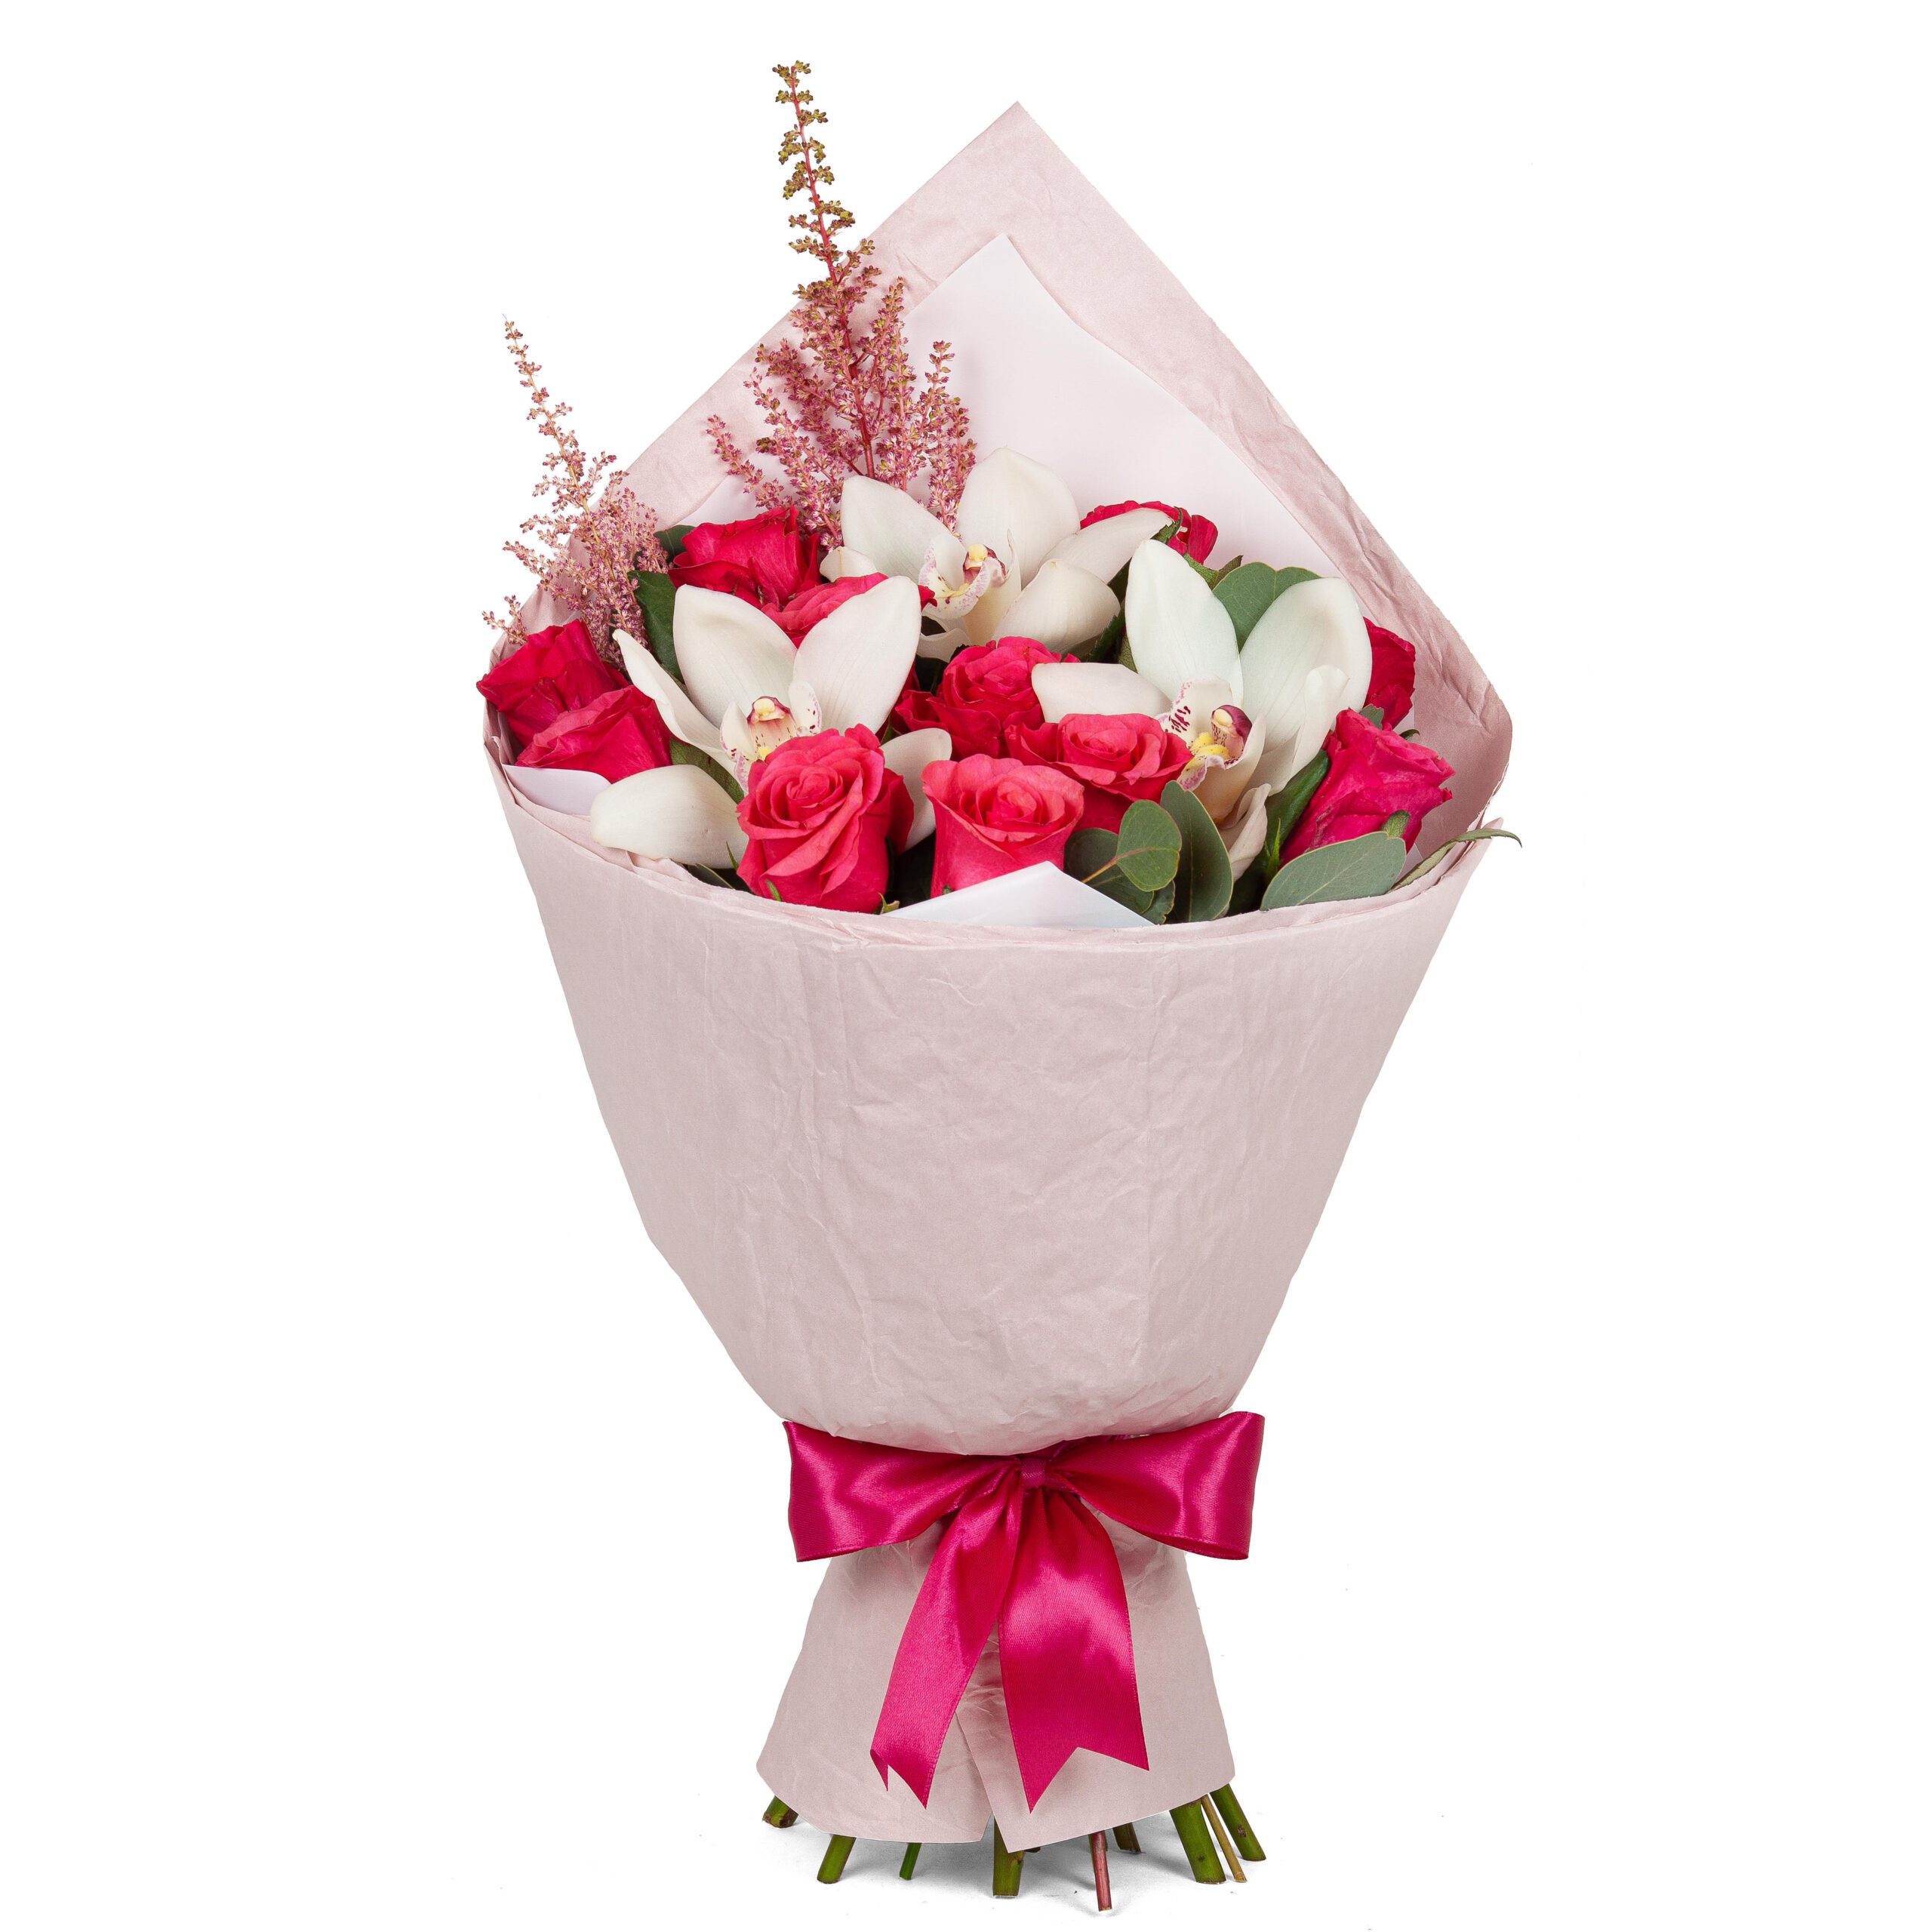 Bouquet of red an white flowers wrapped in pink paper cone with ribbon for present isolated on white background